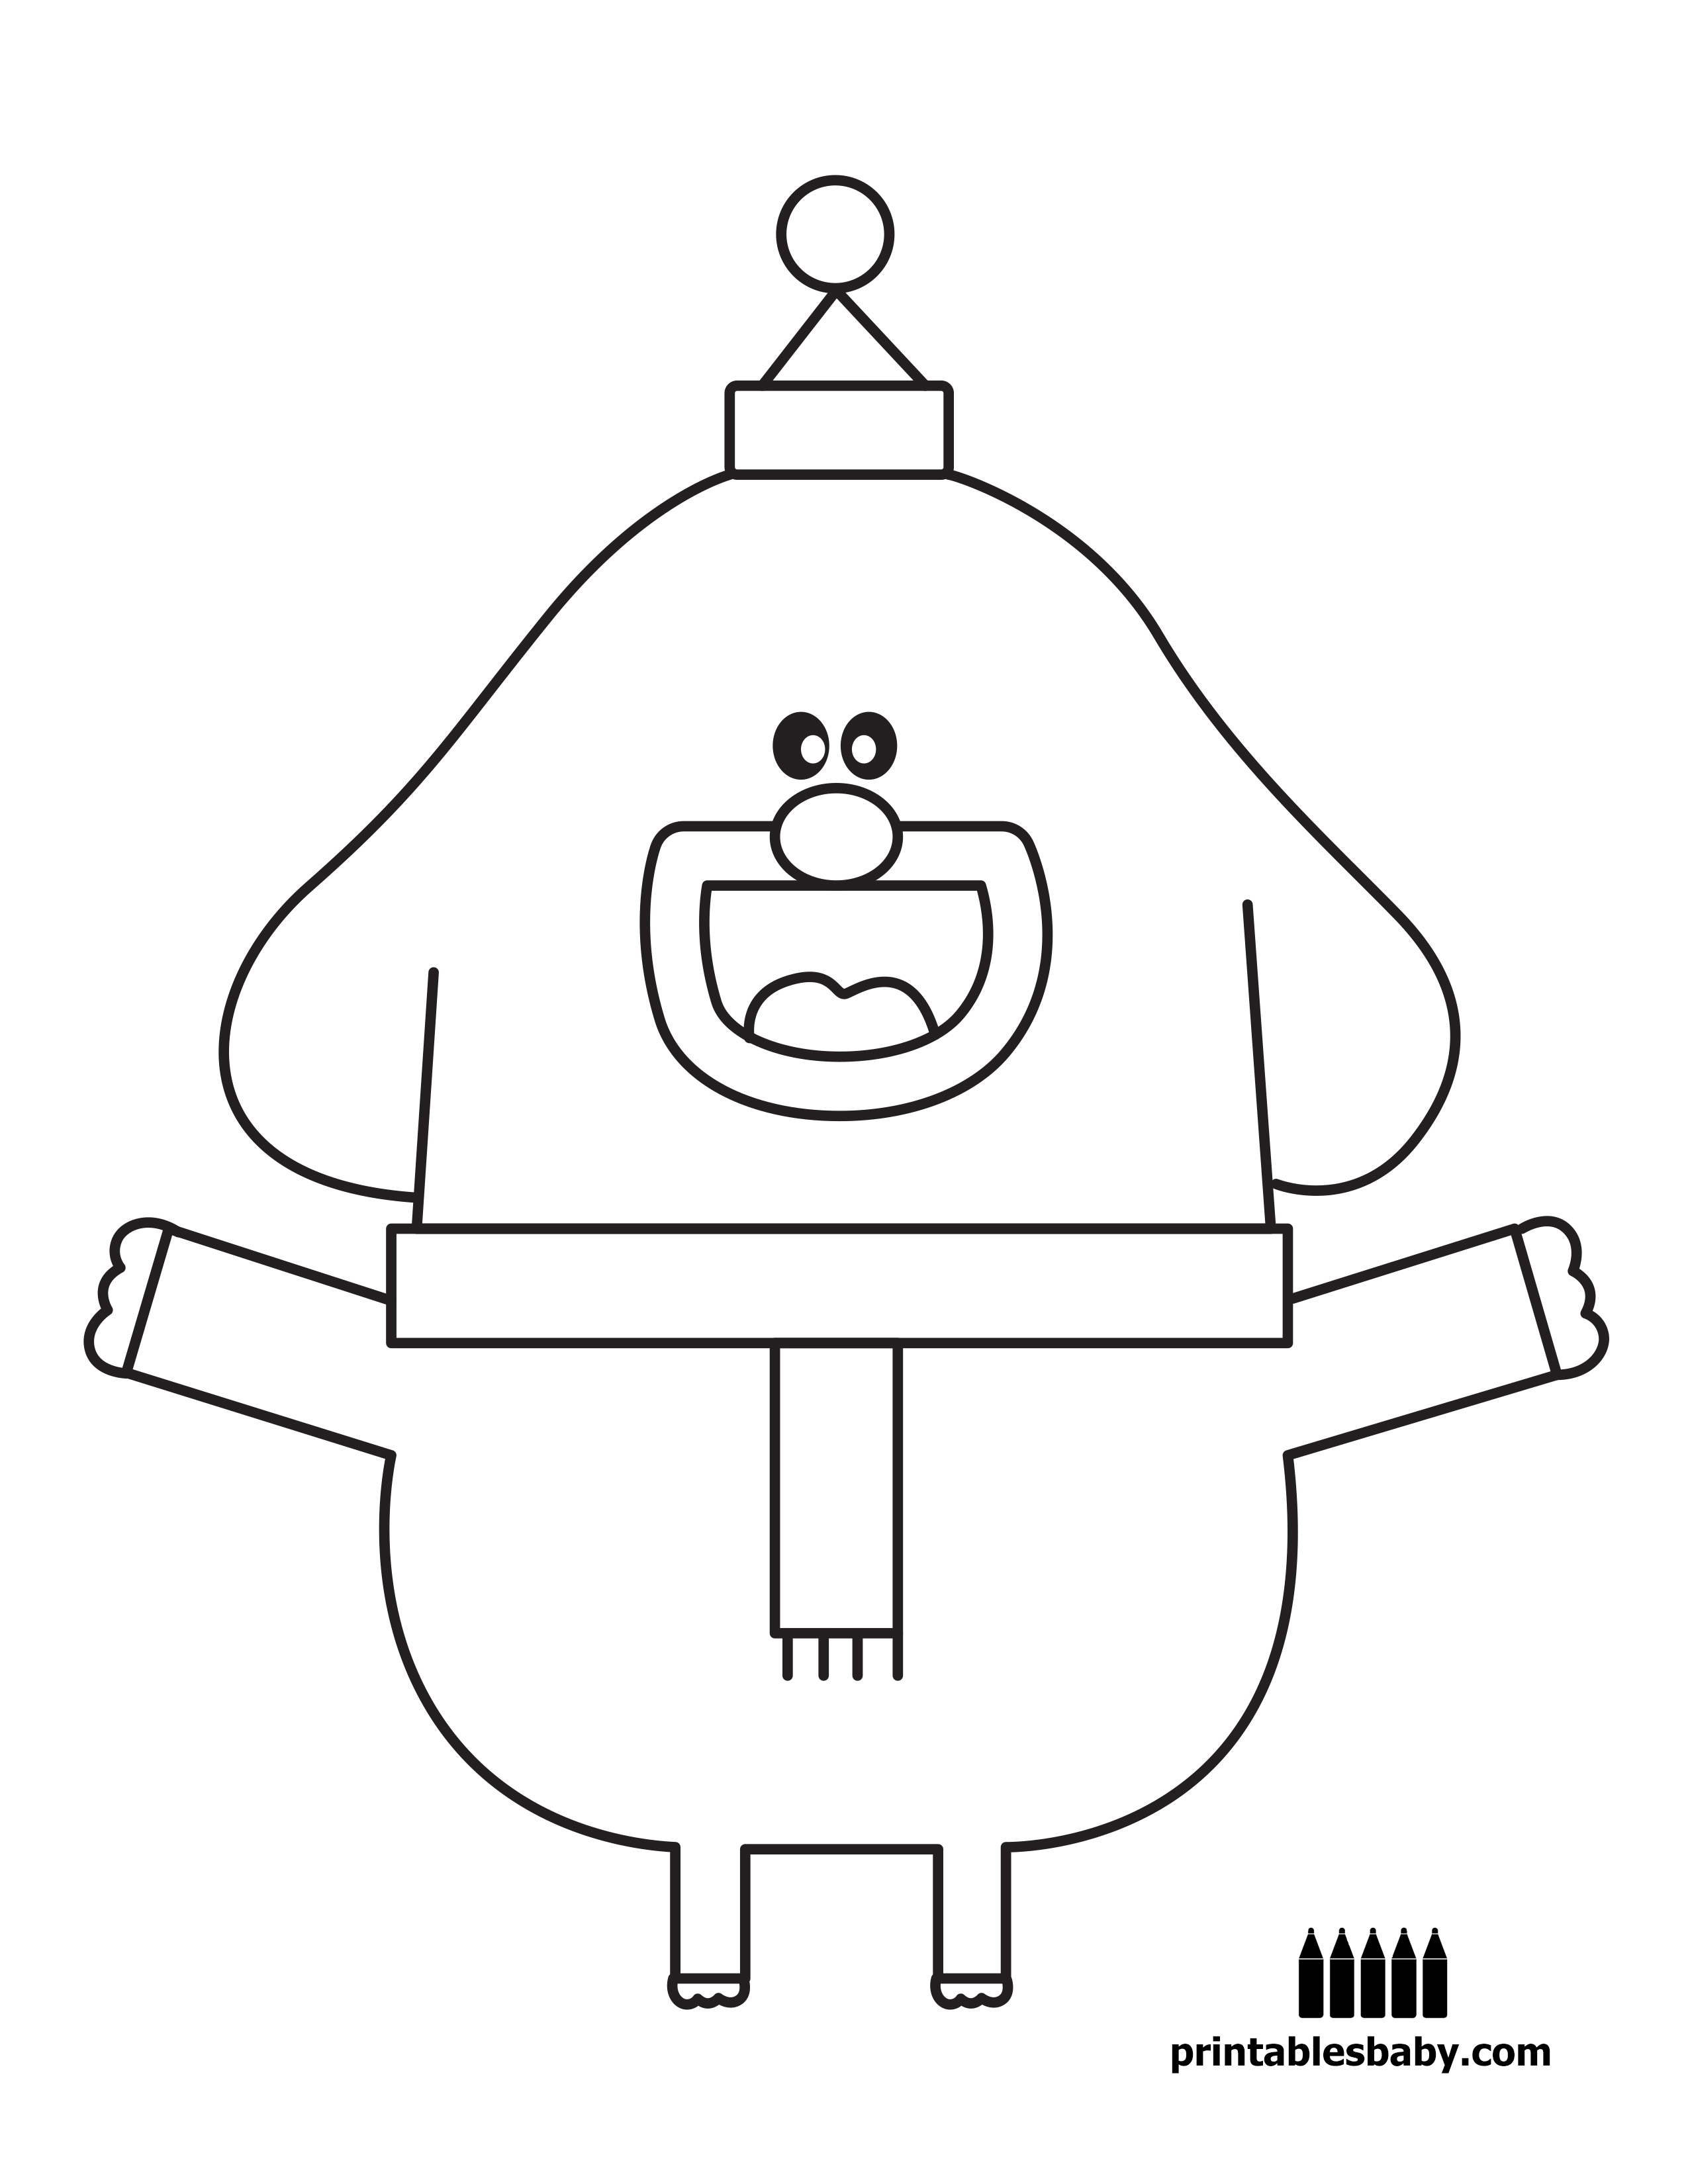 Hey Duggee | Printables Baby - Free Cartoon Coloring Pages | Free poster  printables, Coloring pages, Printable coloring pages